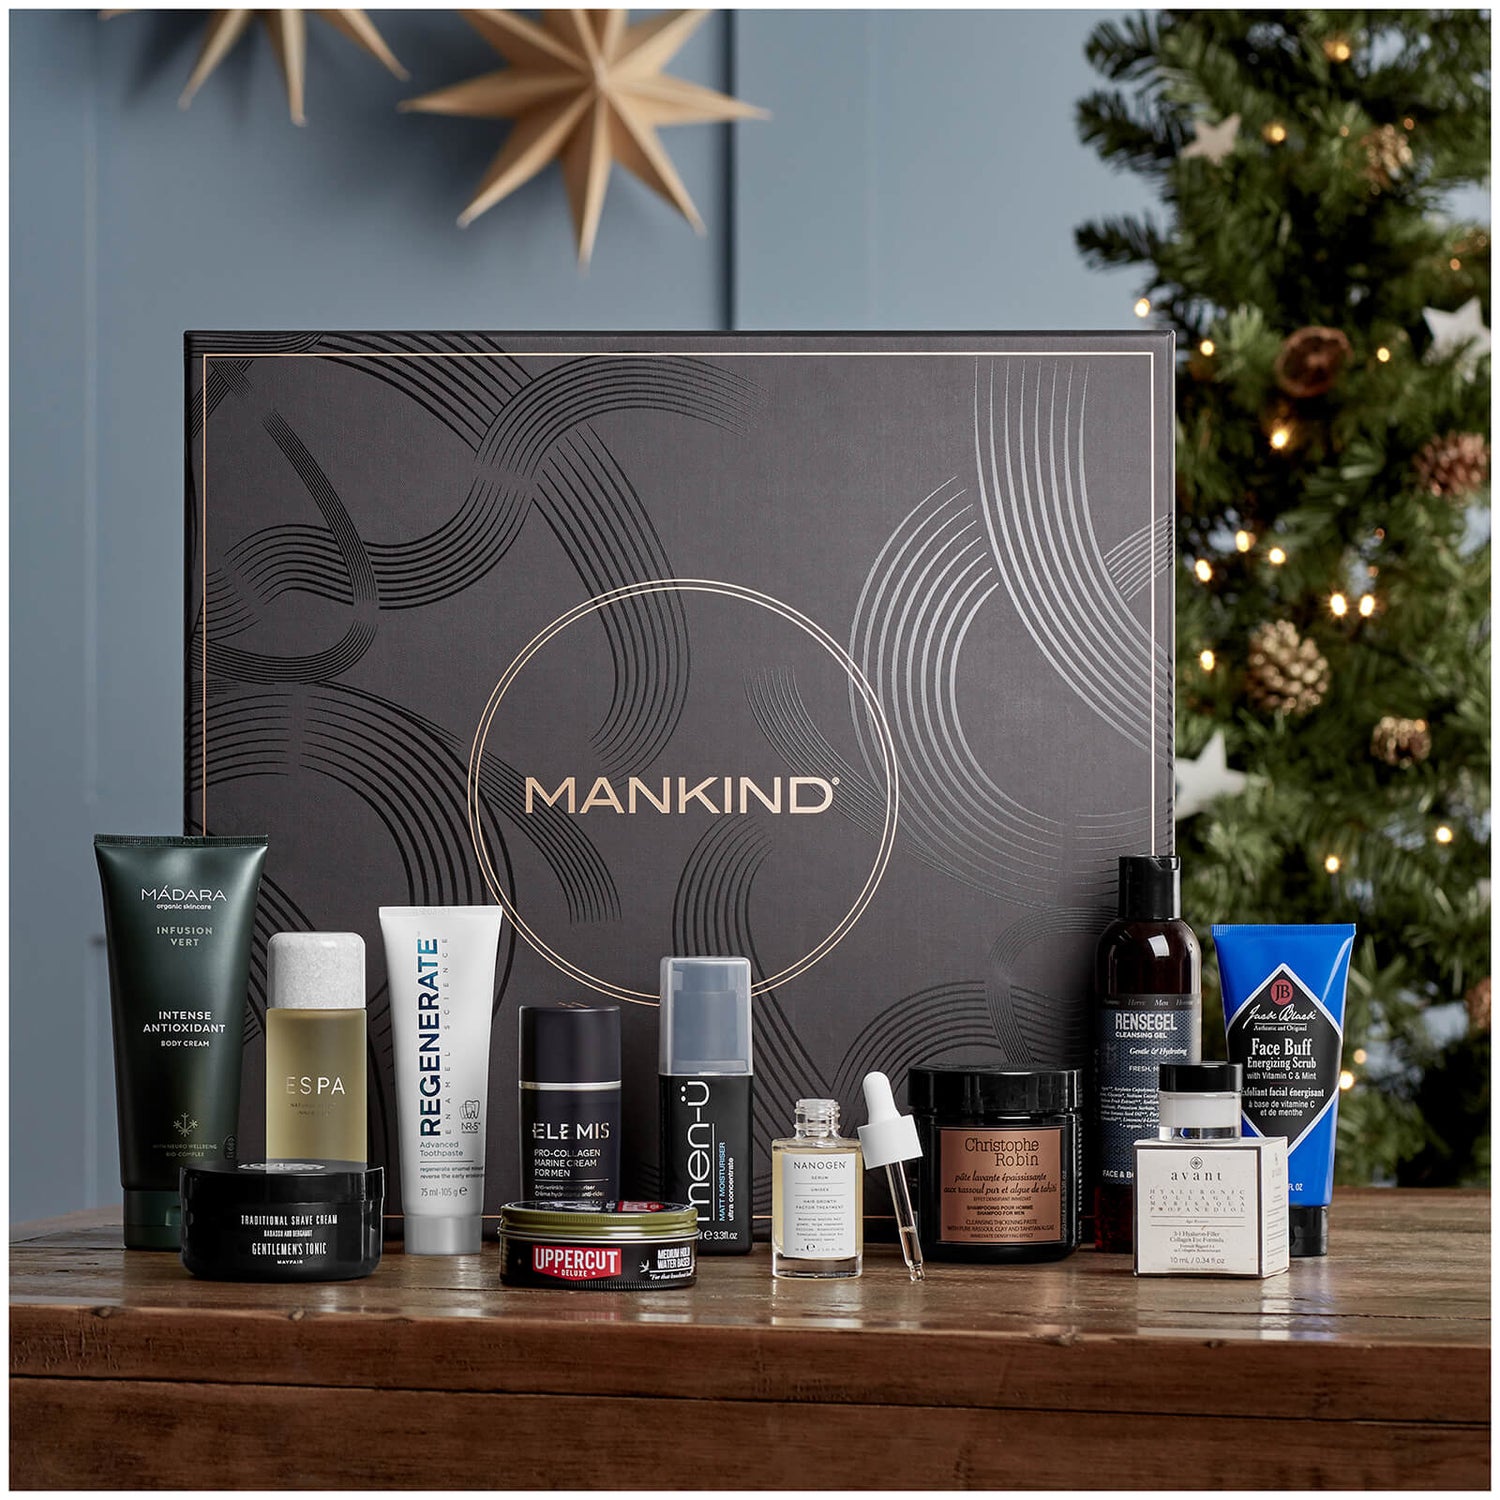 The Mankind Award Winners Collection (worth over £370)